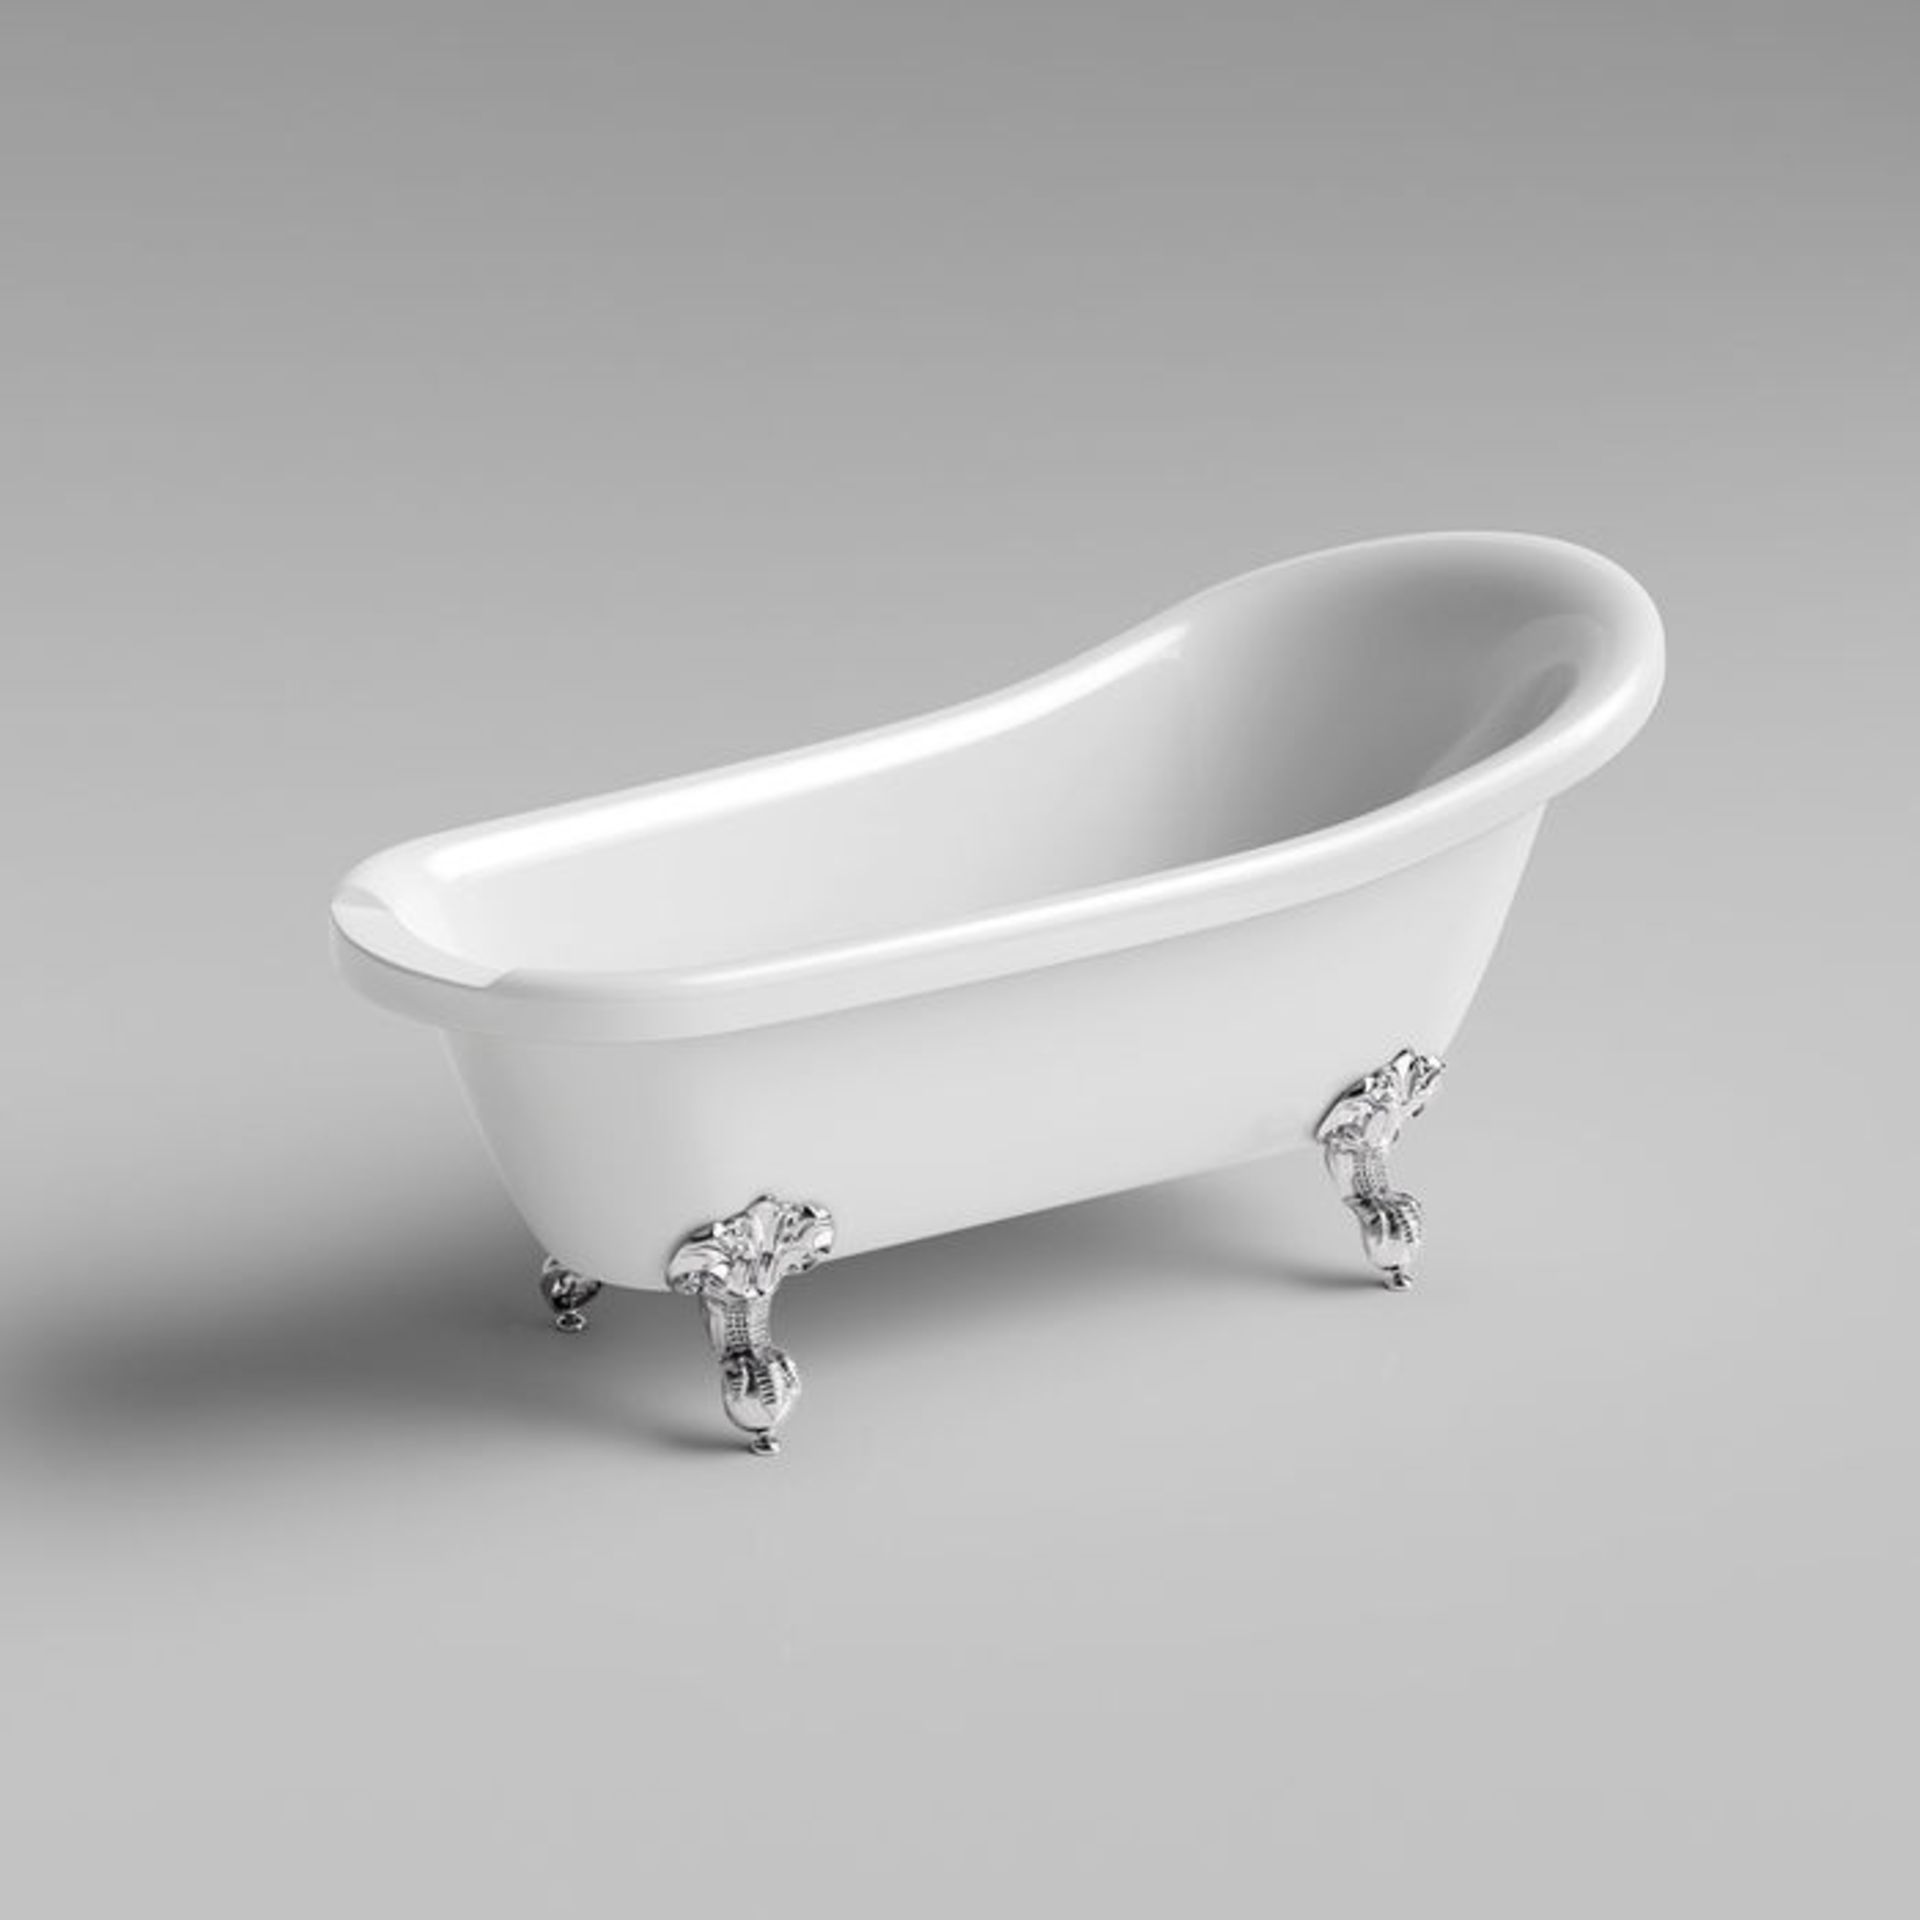 (G199) 1720mm Victoria Traditional Roll Top Slipper Bath - Ball Feet - Large. RRP £799.99. Our - Image 3 of 4